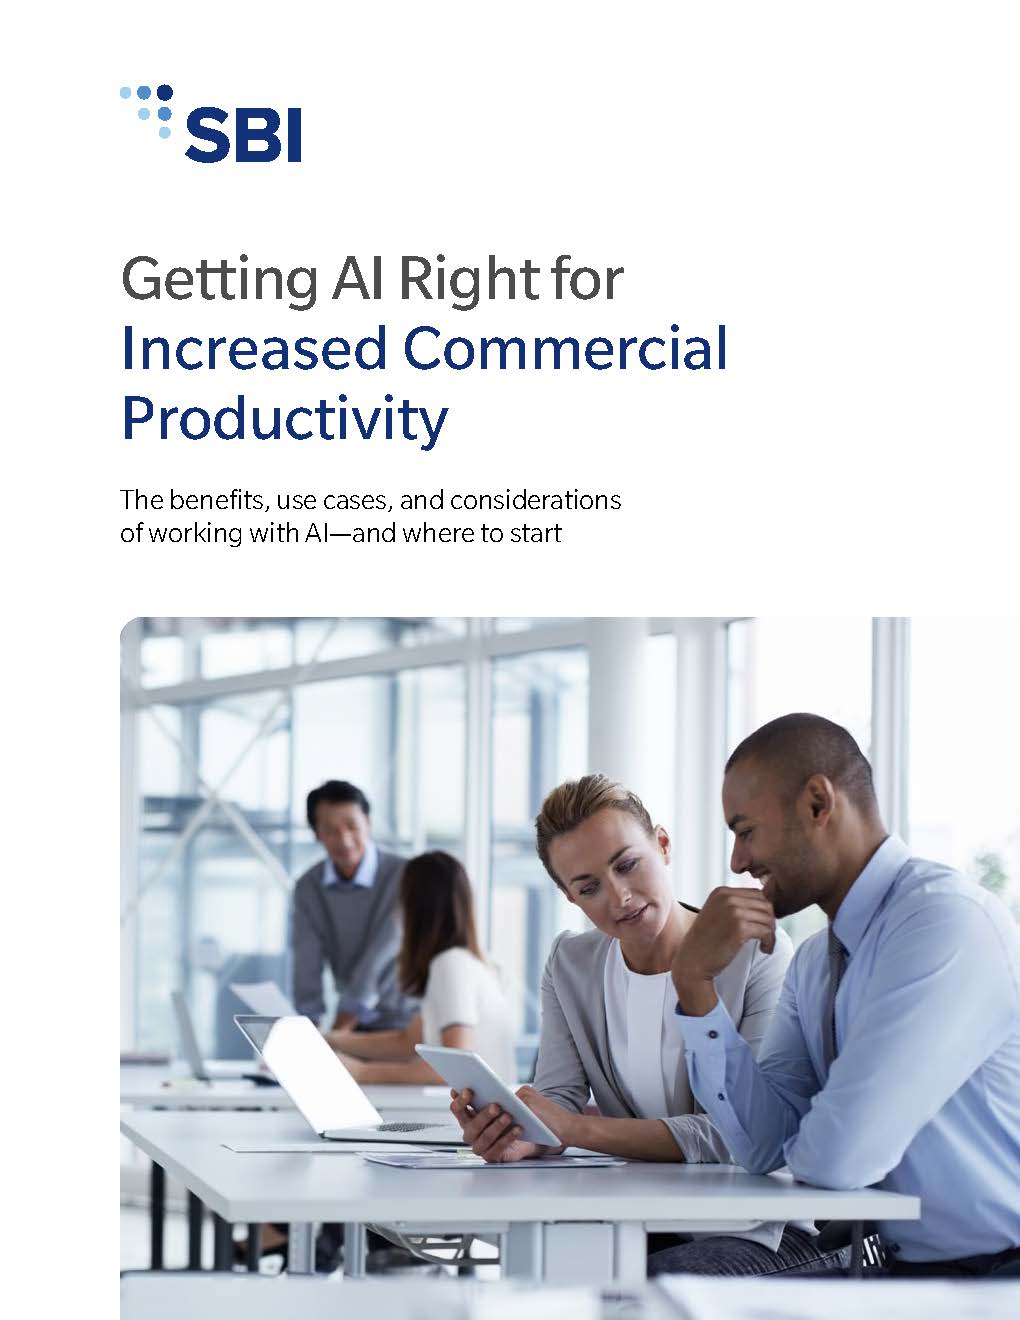 SBI_eBook_Getting_AI_Right_for_Increased_Commercial_Productivity_Thumbnail